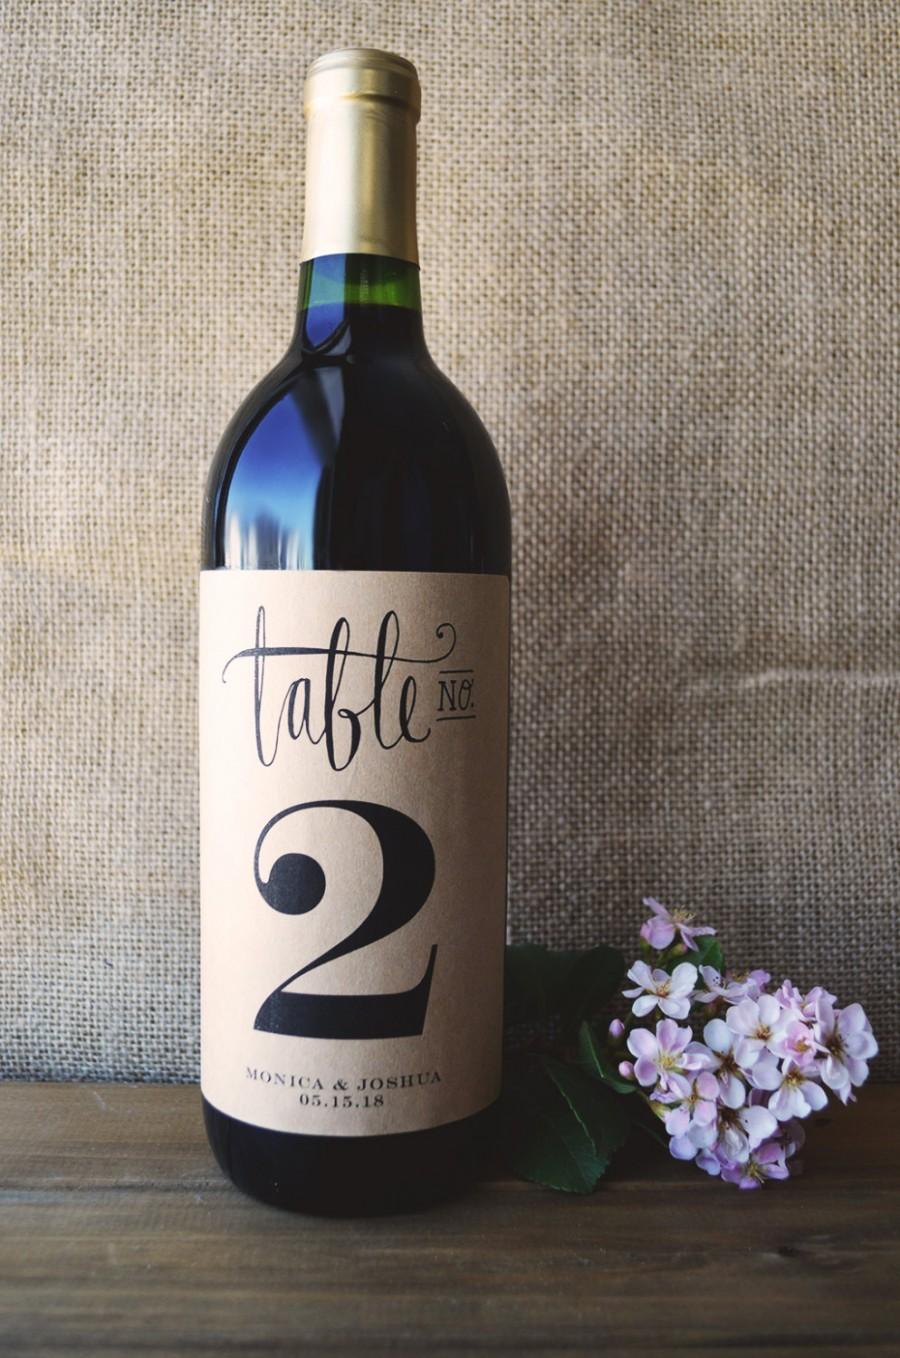 Wedding - Wine Table Number - Wine Bottle Table Number  - Wedding Wine Table Number - Wedding Wine Bottle Table Number - Pack of 4 Labels